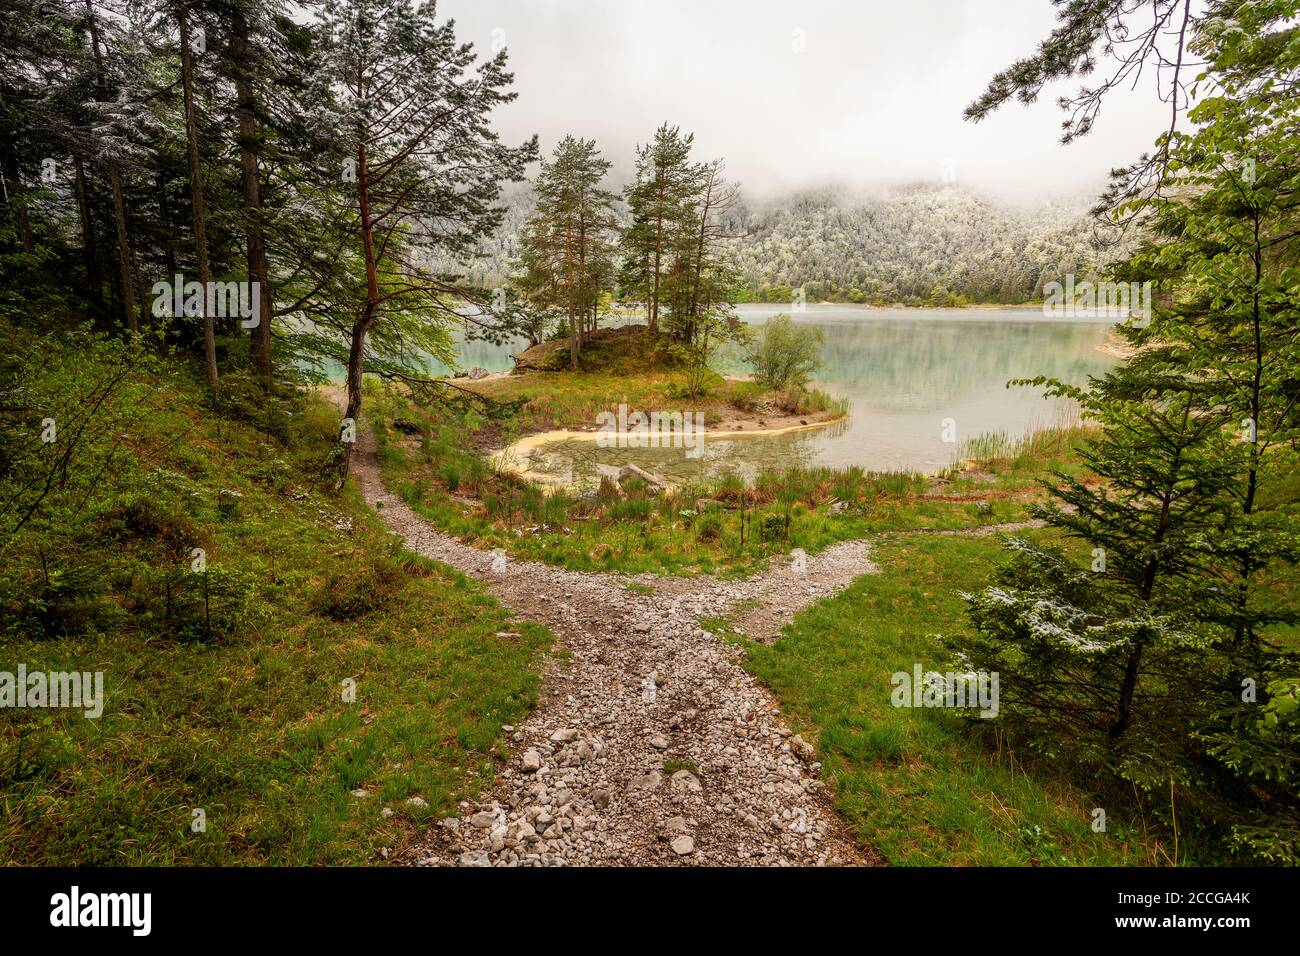 Eisheilige am Eibsee, a hiking trail forks, in the background the Eibsee with peninsula and snow on the trees, while pollen drifts in a small bay. Stock Photo